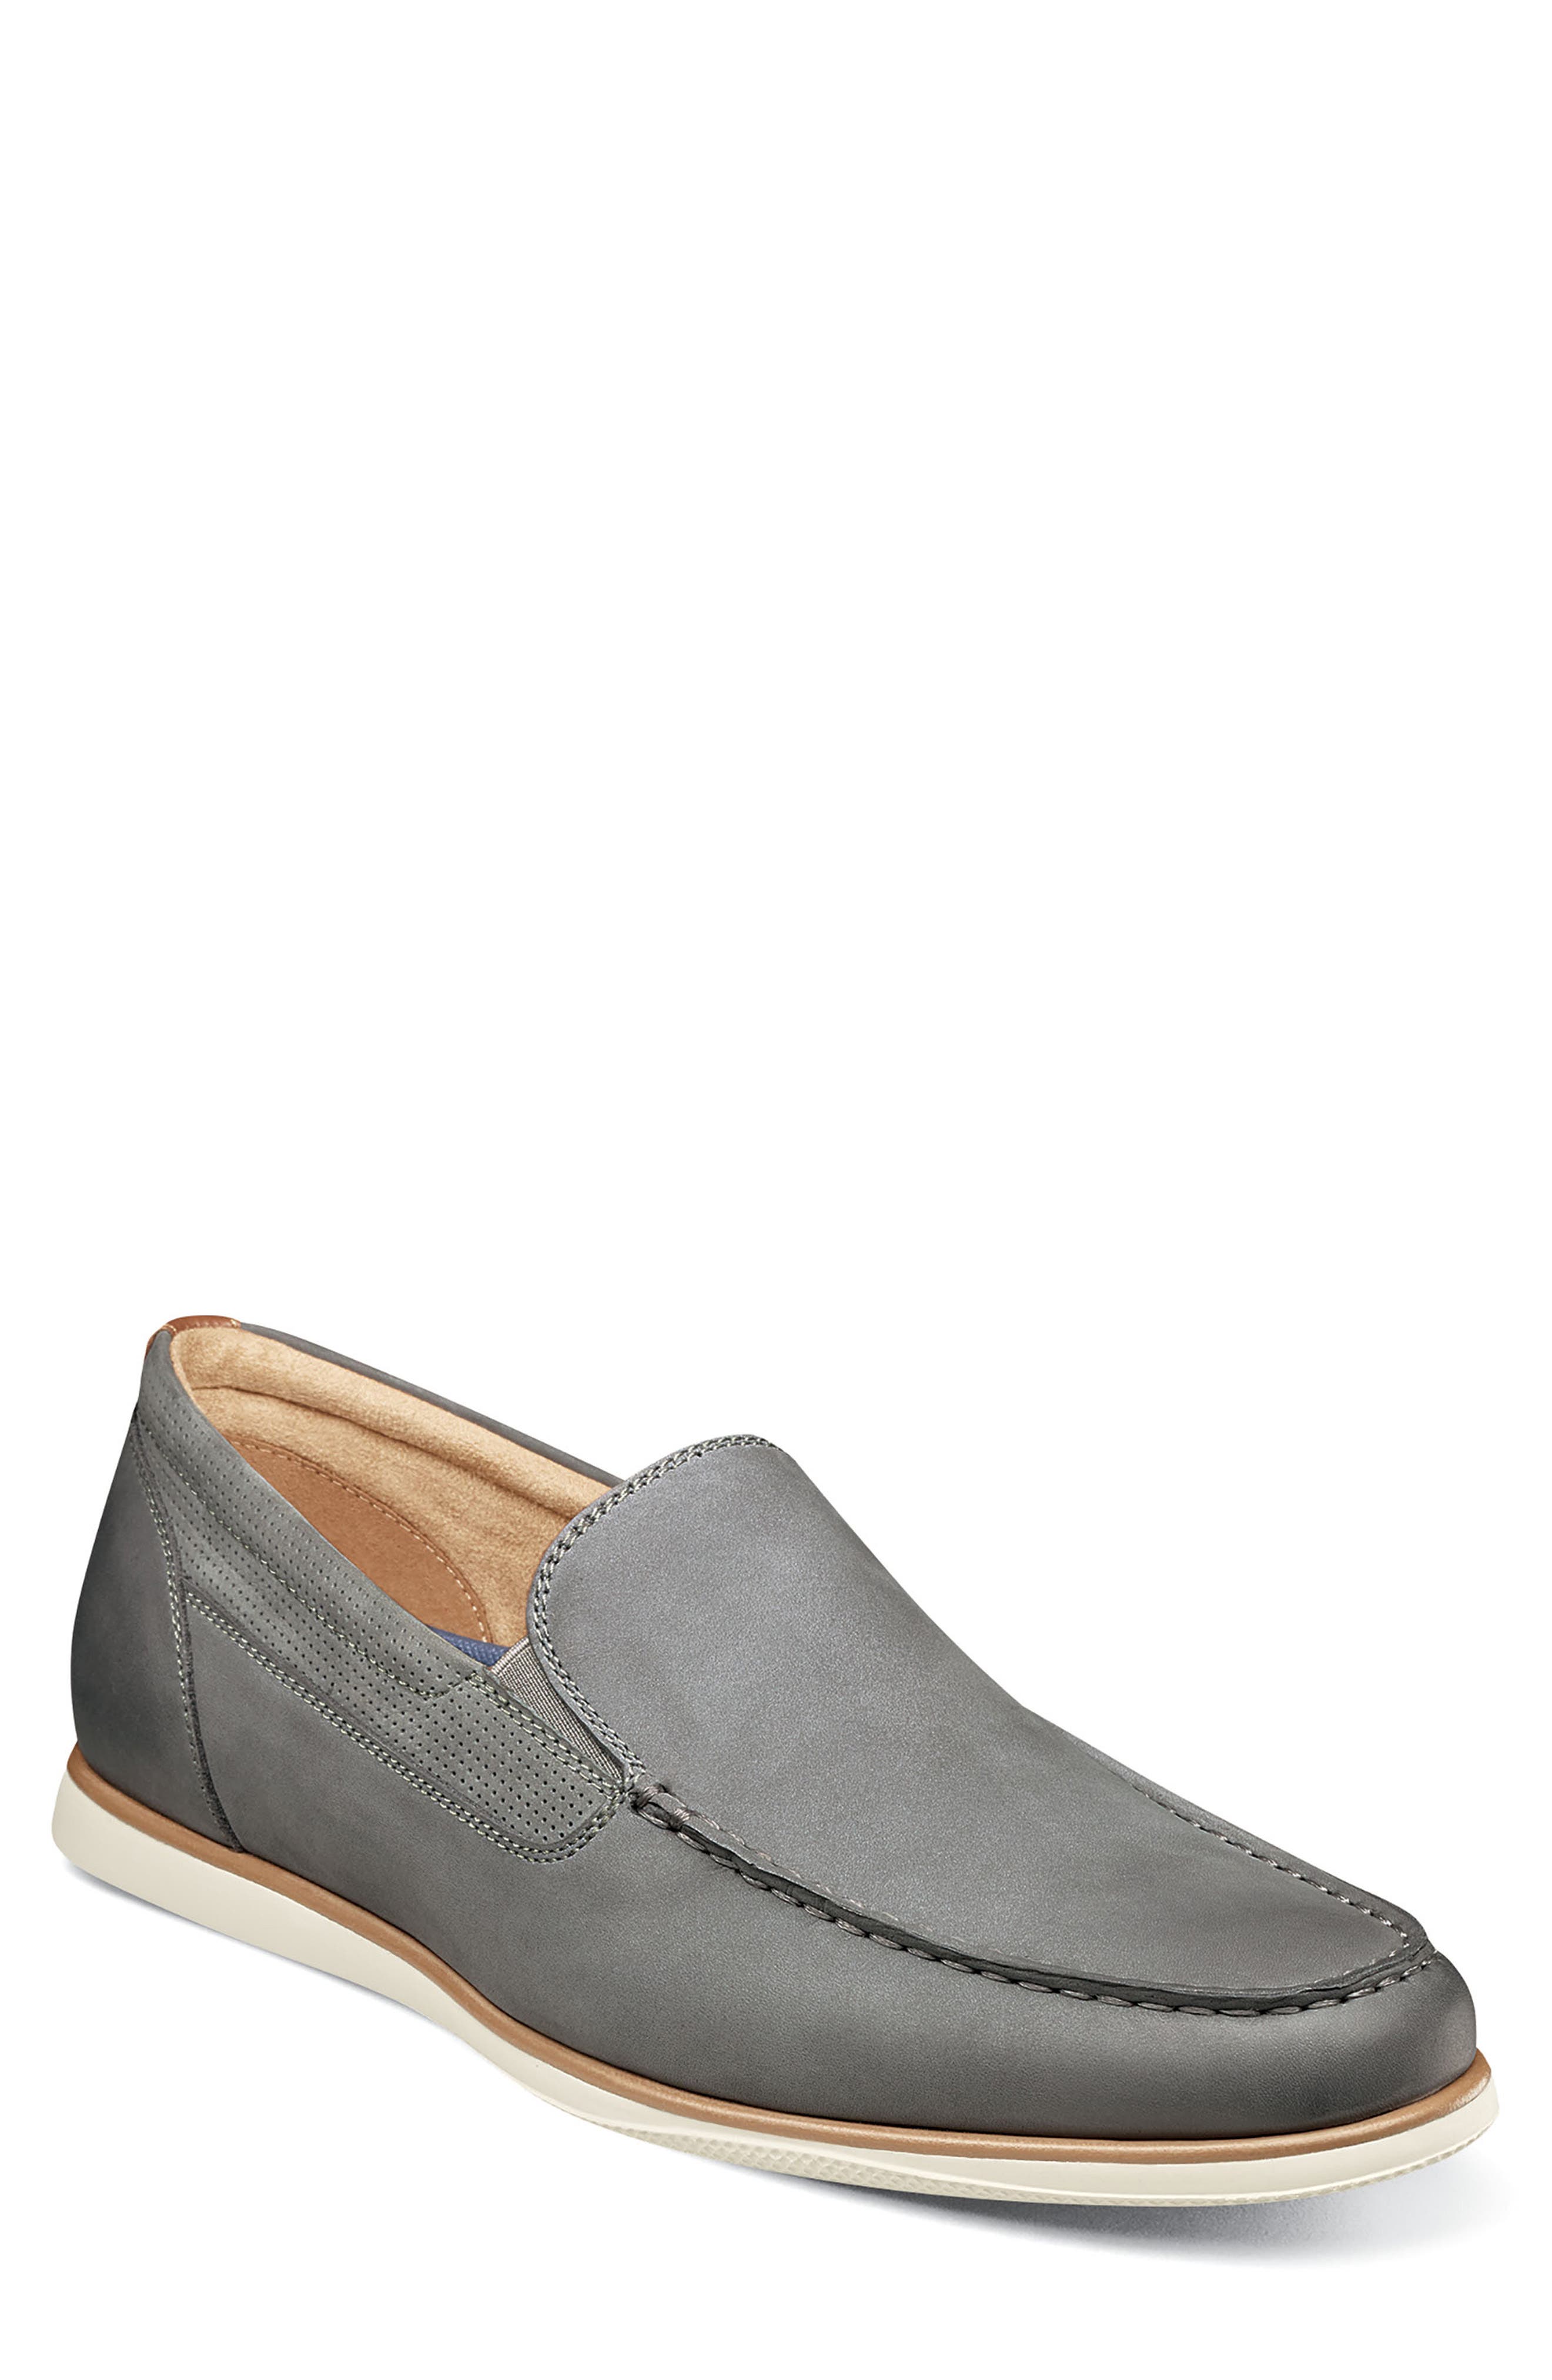 Florsheim - Men's Casual Fashion Shoes and Sneakers